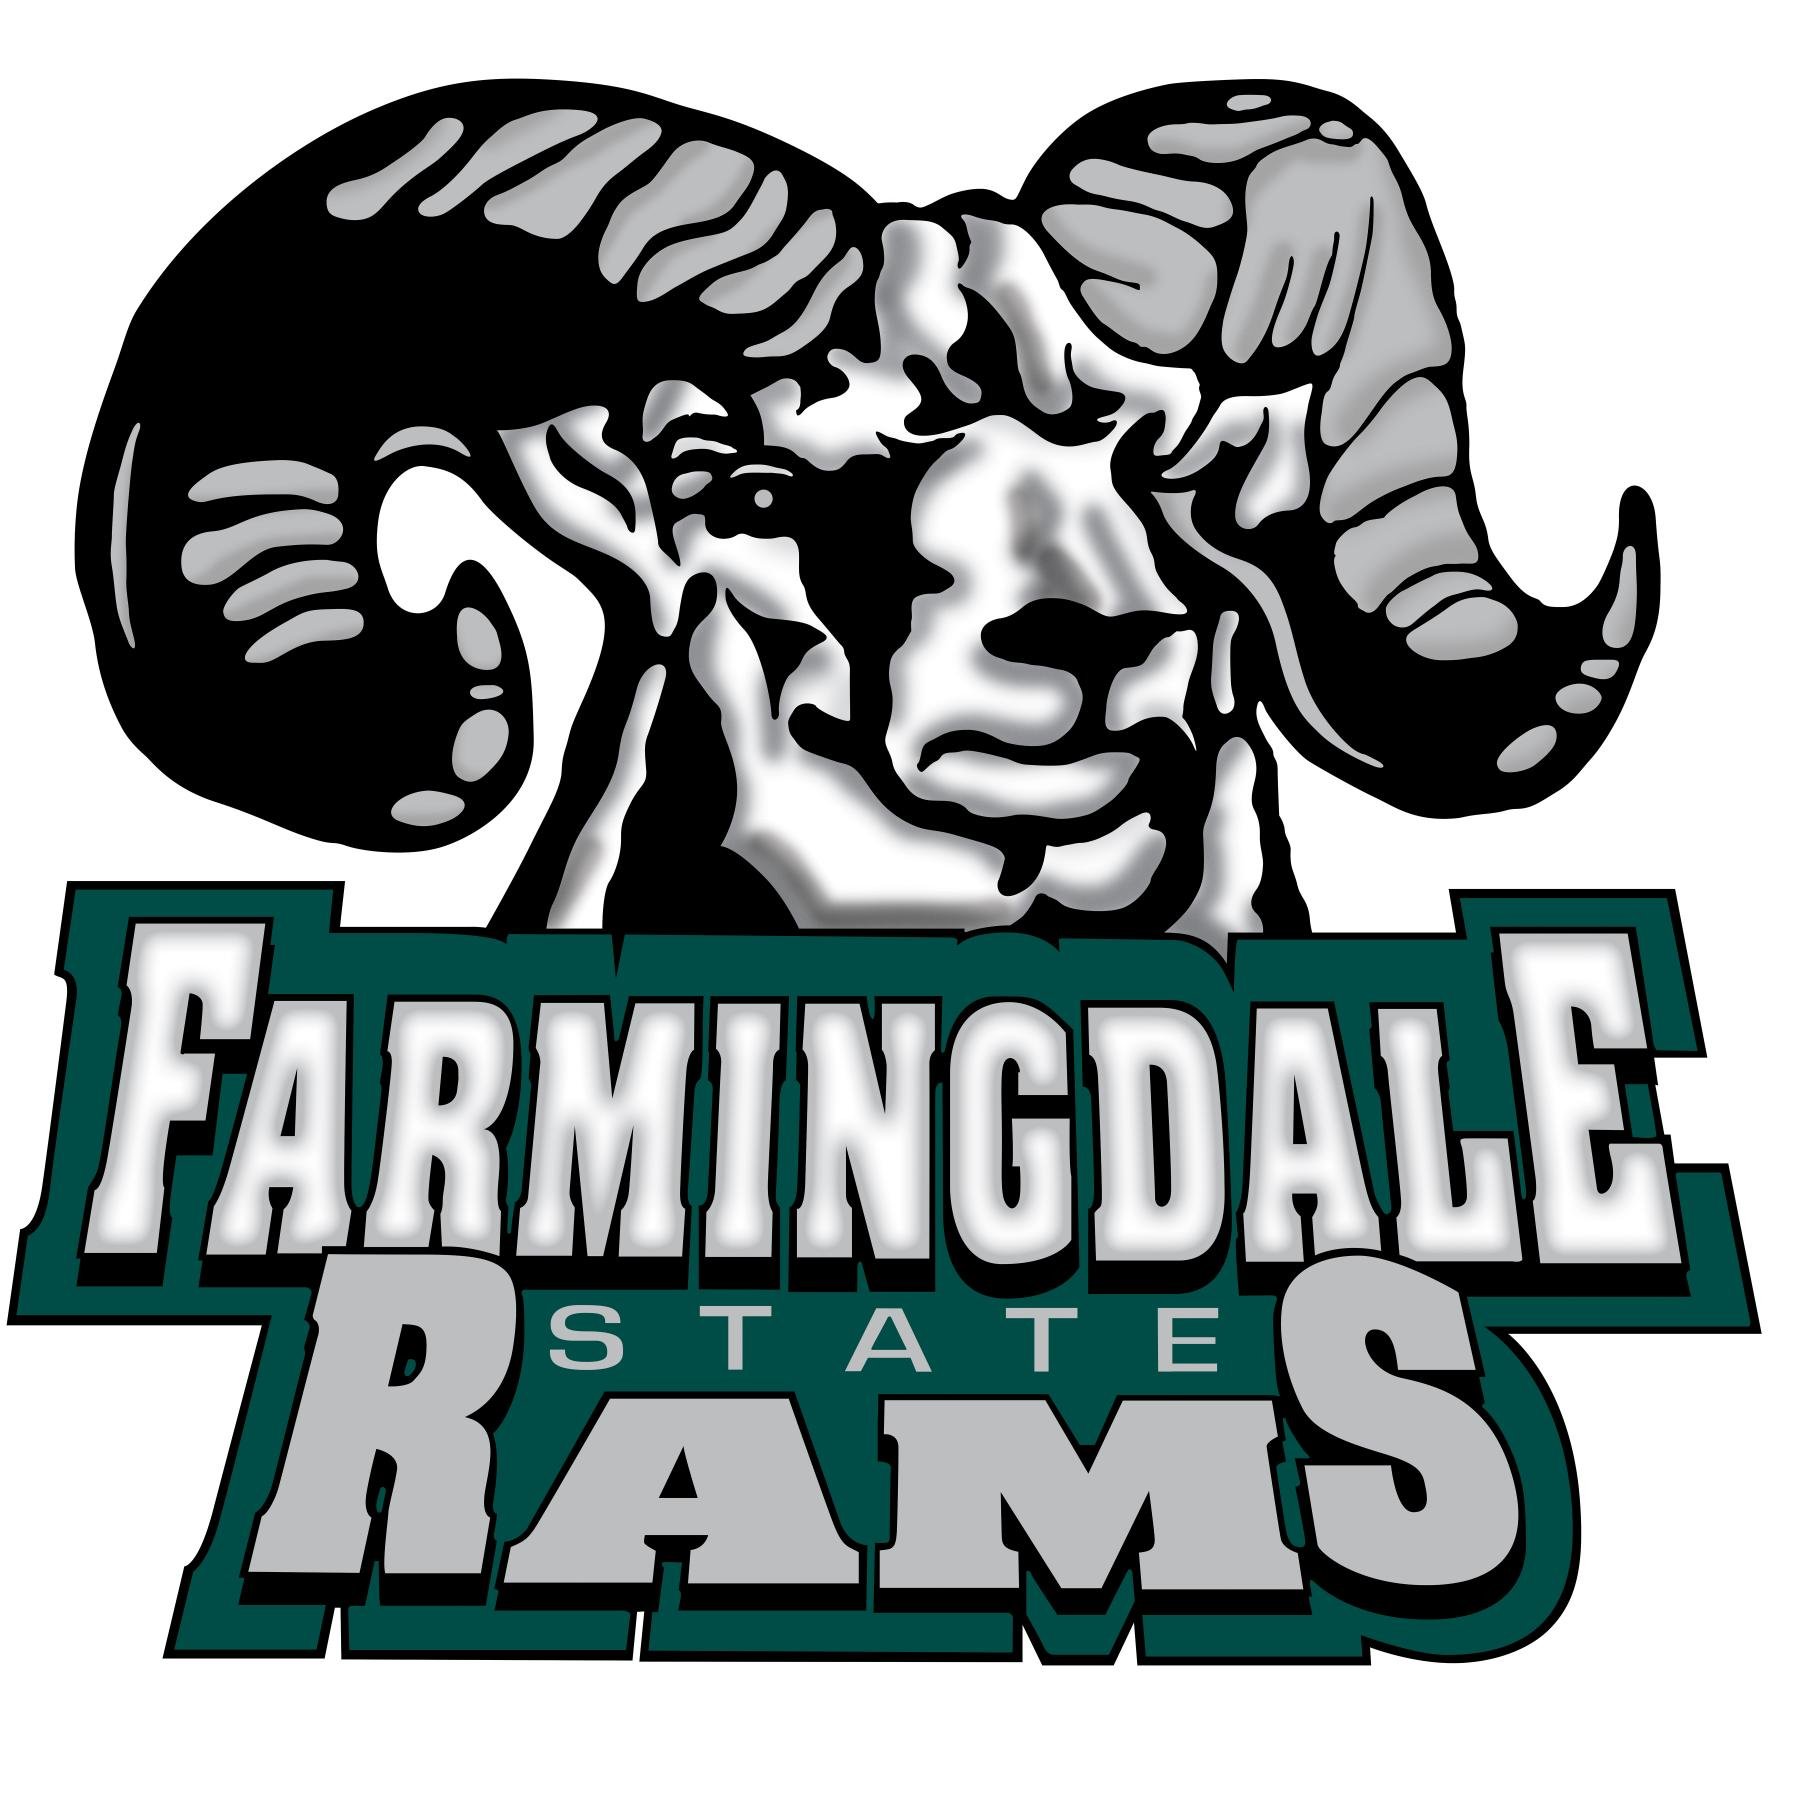 Farmingdale State Rams Athletics - Official Twitter Account...Go Rams!!!